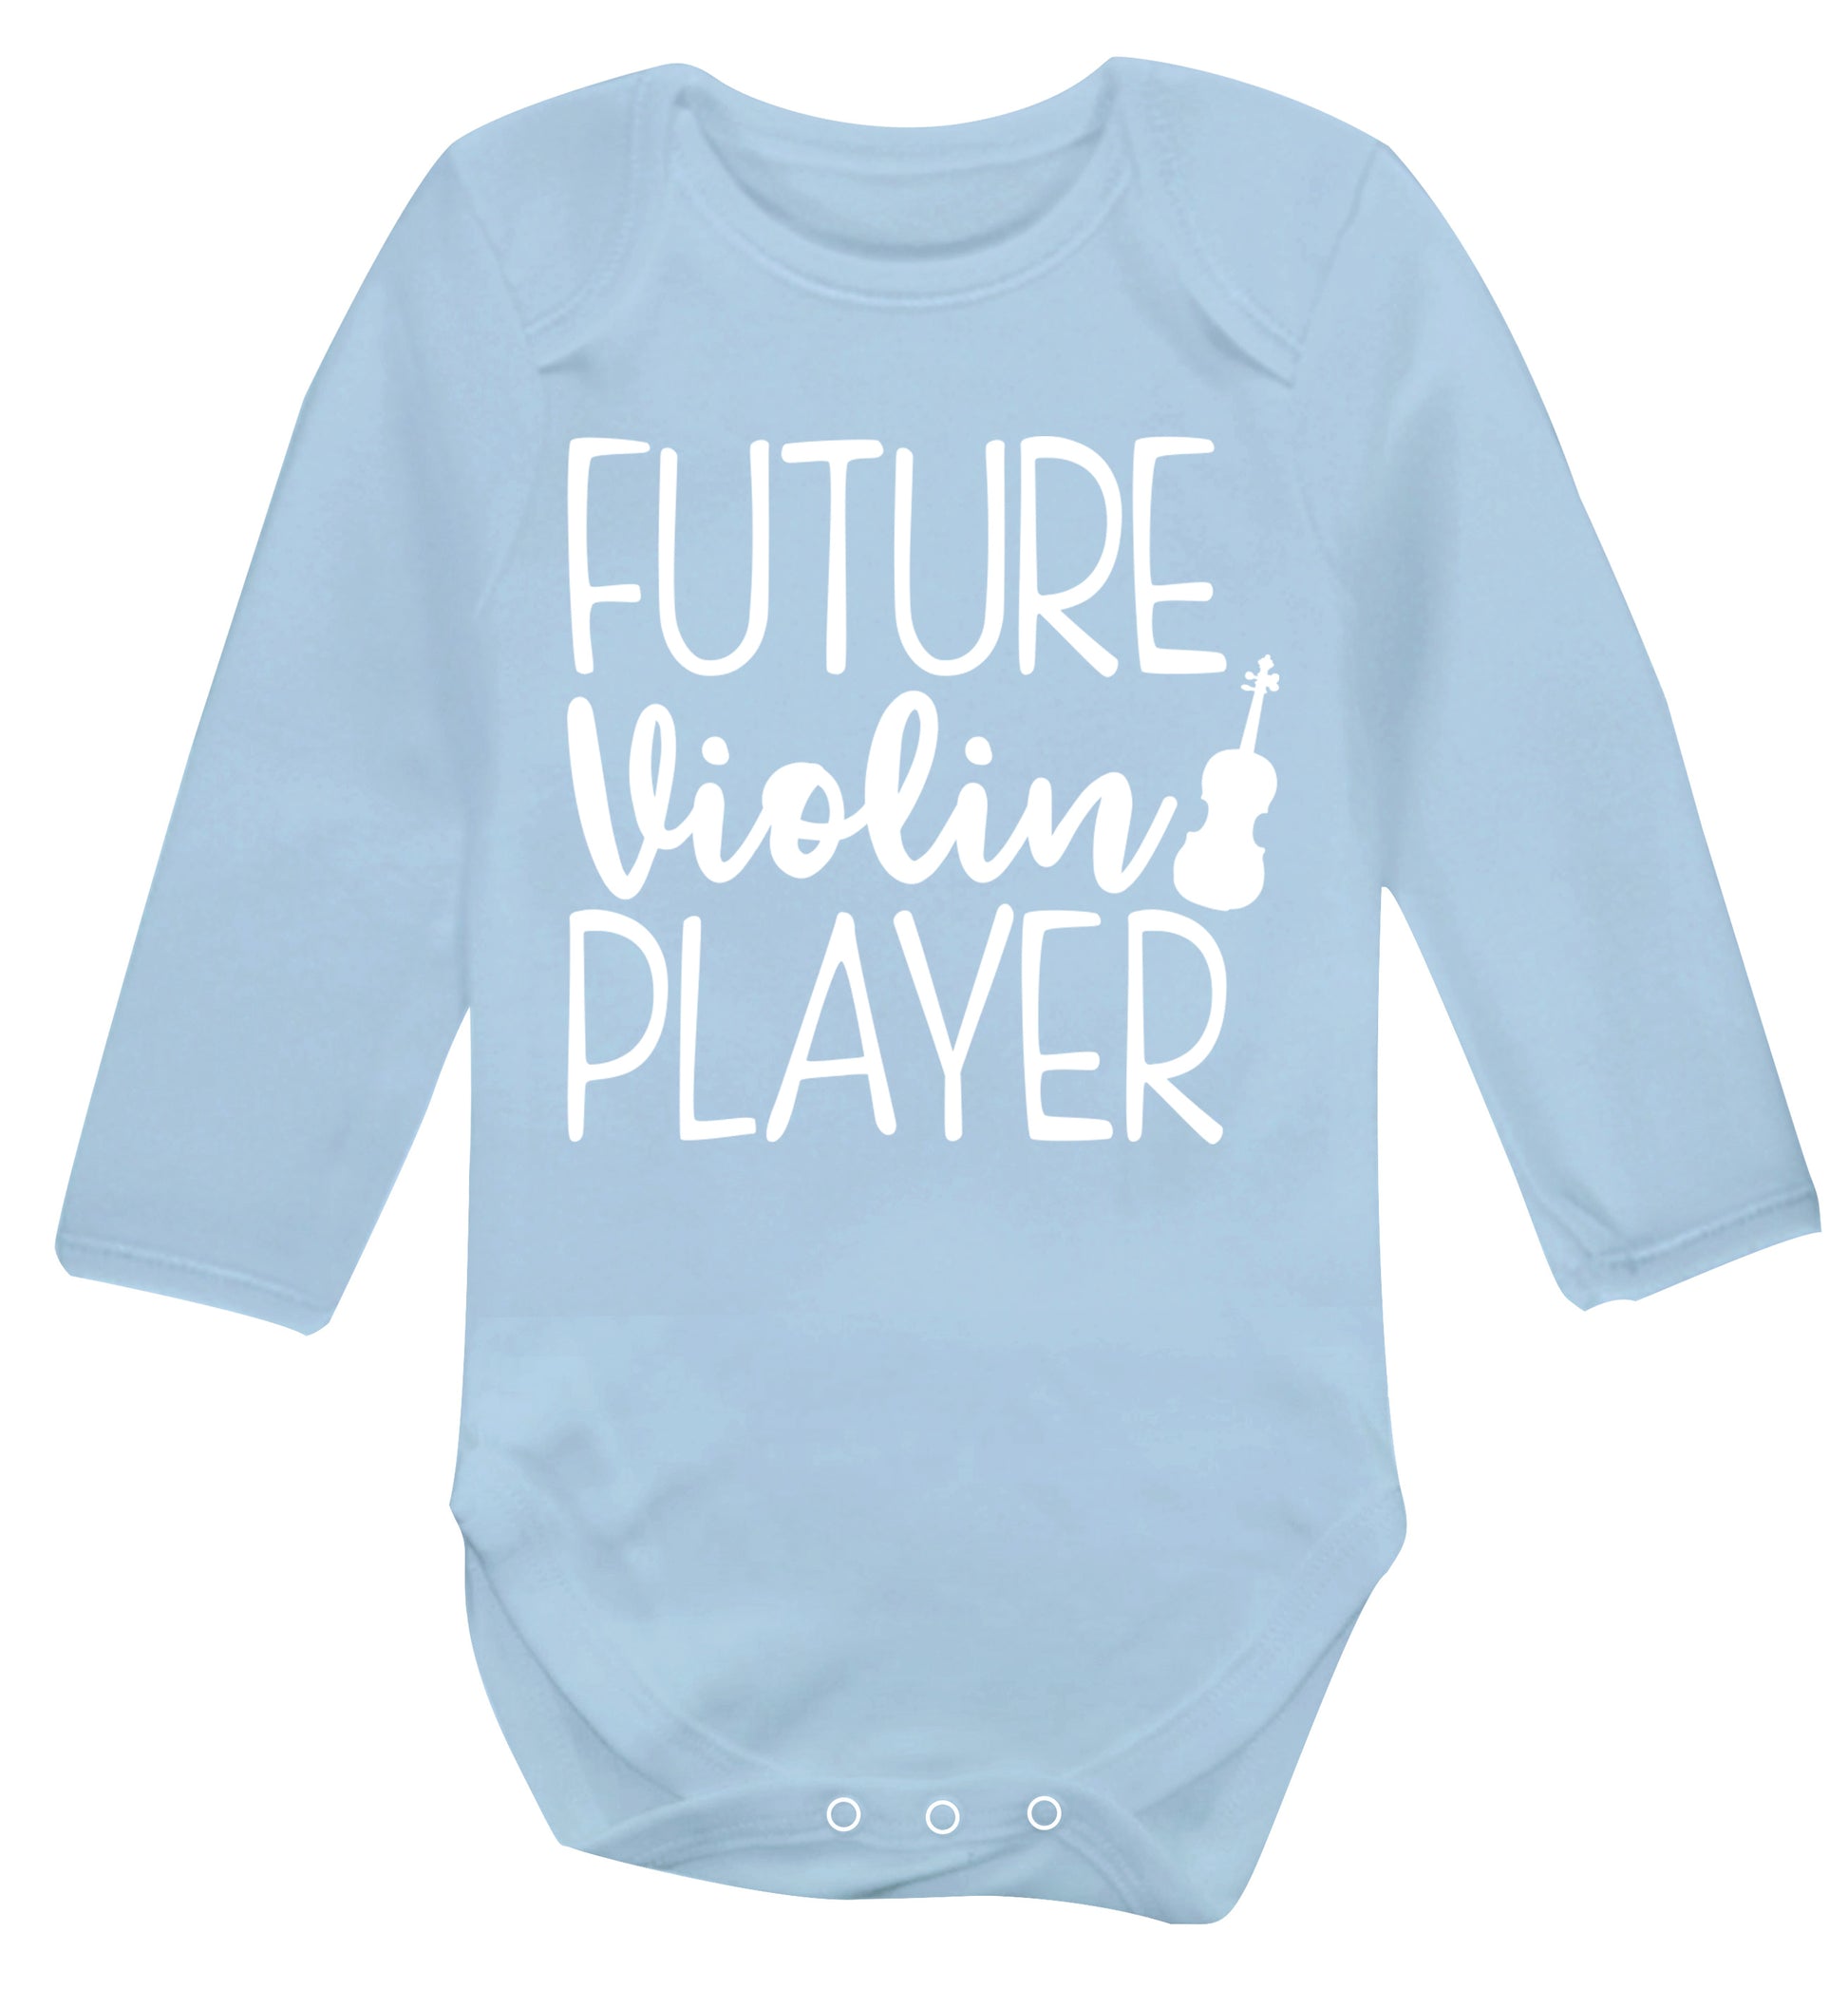 Future Violin Player Baby Vest long sleeved pale blue 6-12 months